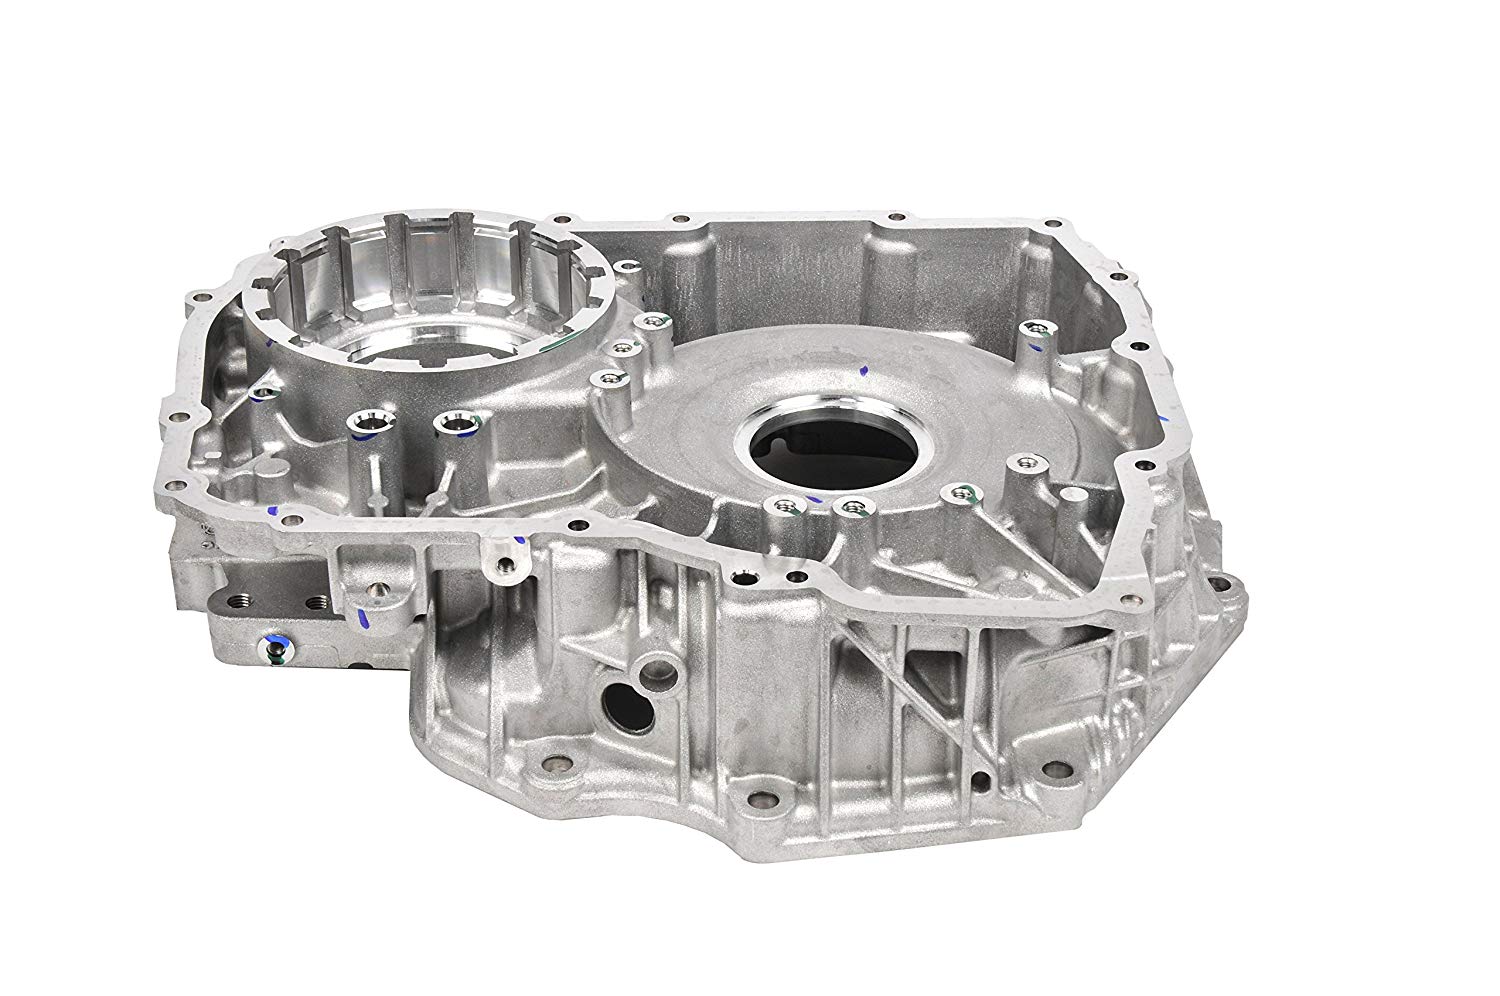 6 technical review of Aluminum die casting housing